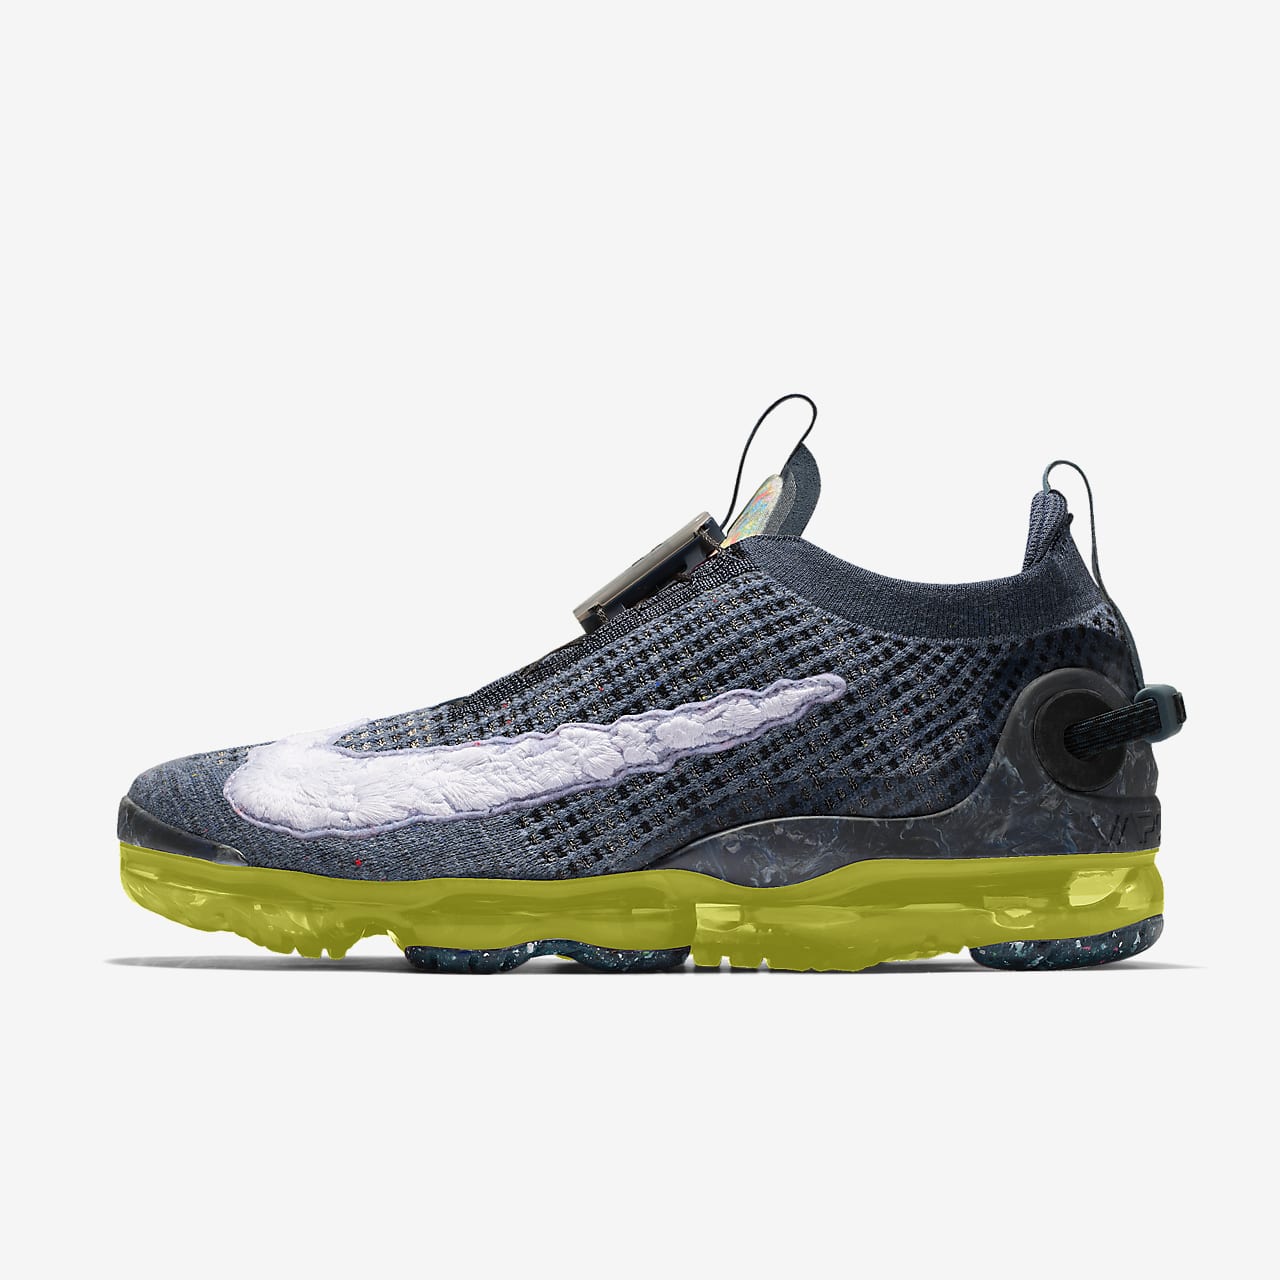 Off White x Nike Air VaporMax Flyknit Black in 2020 Air